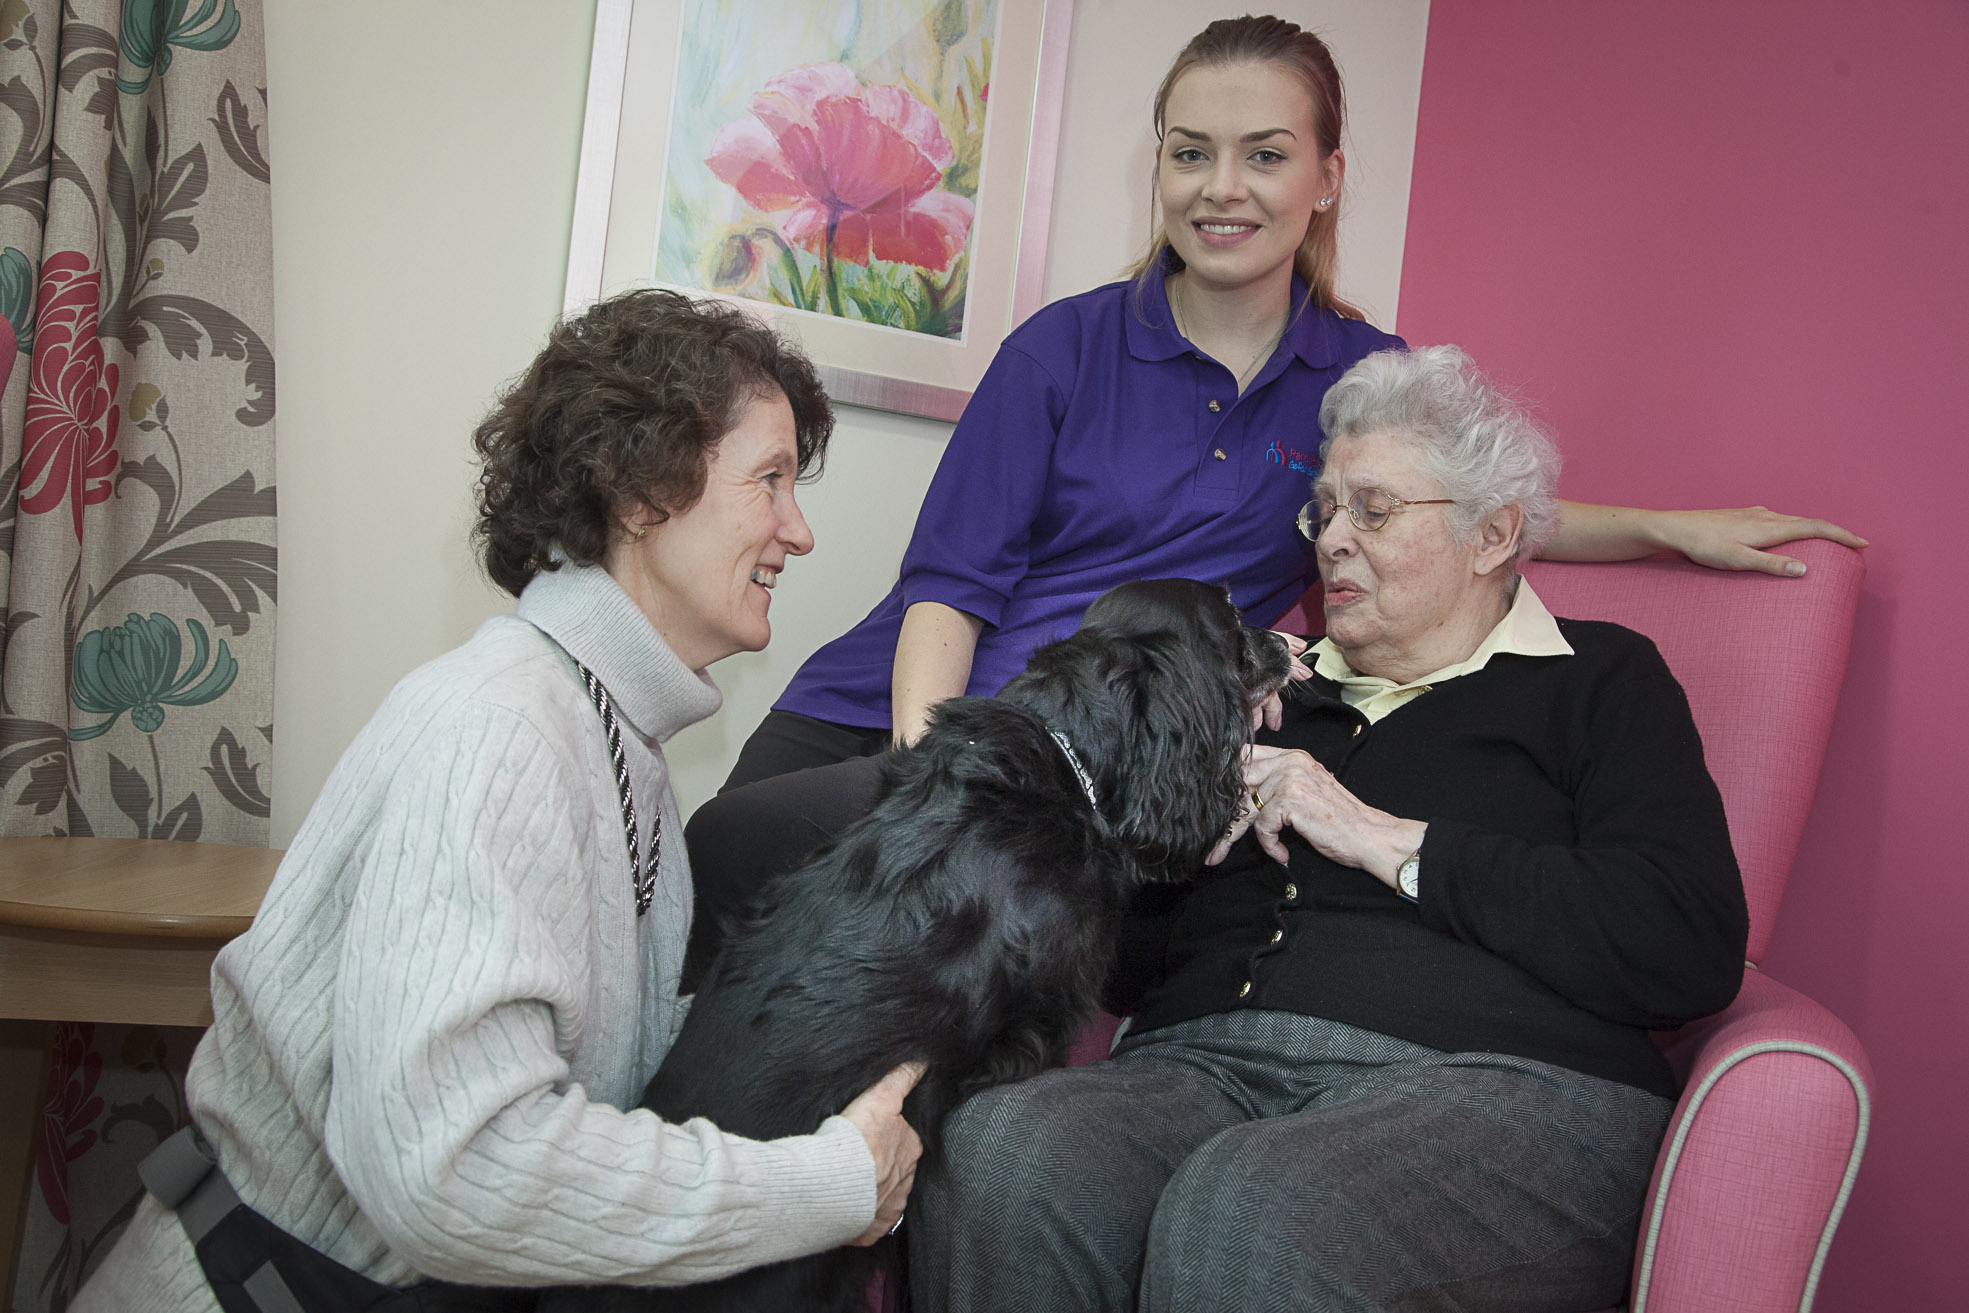 Pet therapy is Gem of an idea at care home